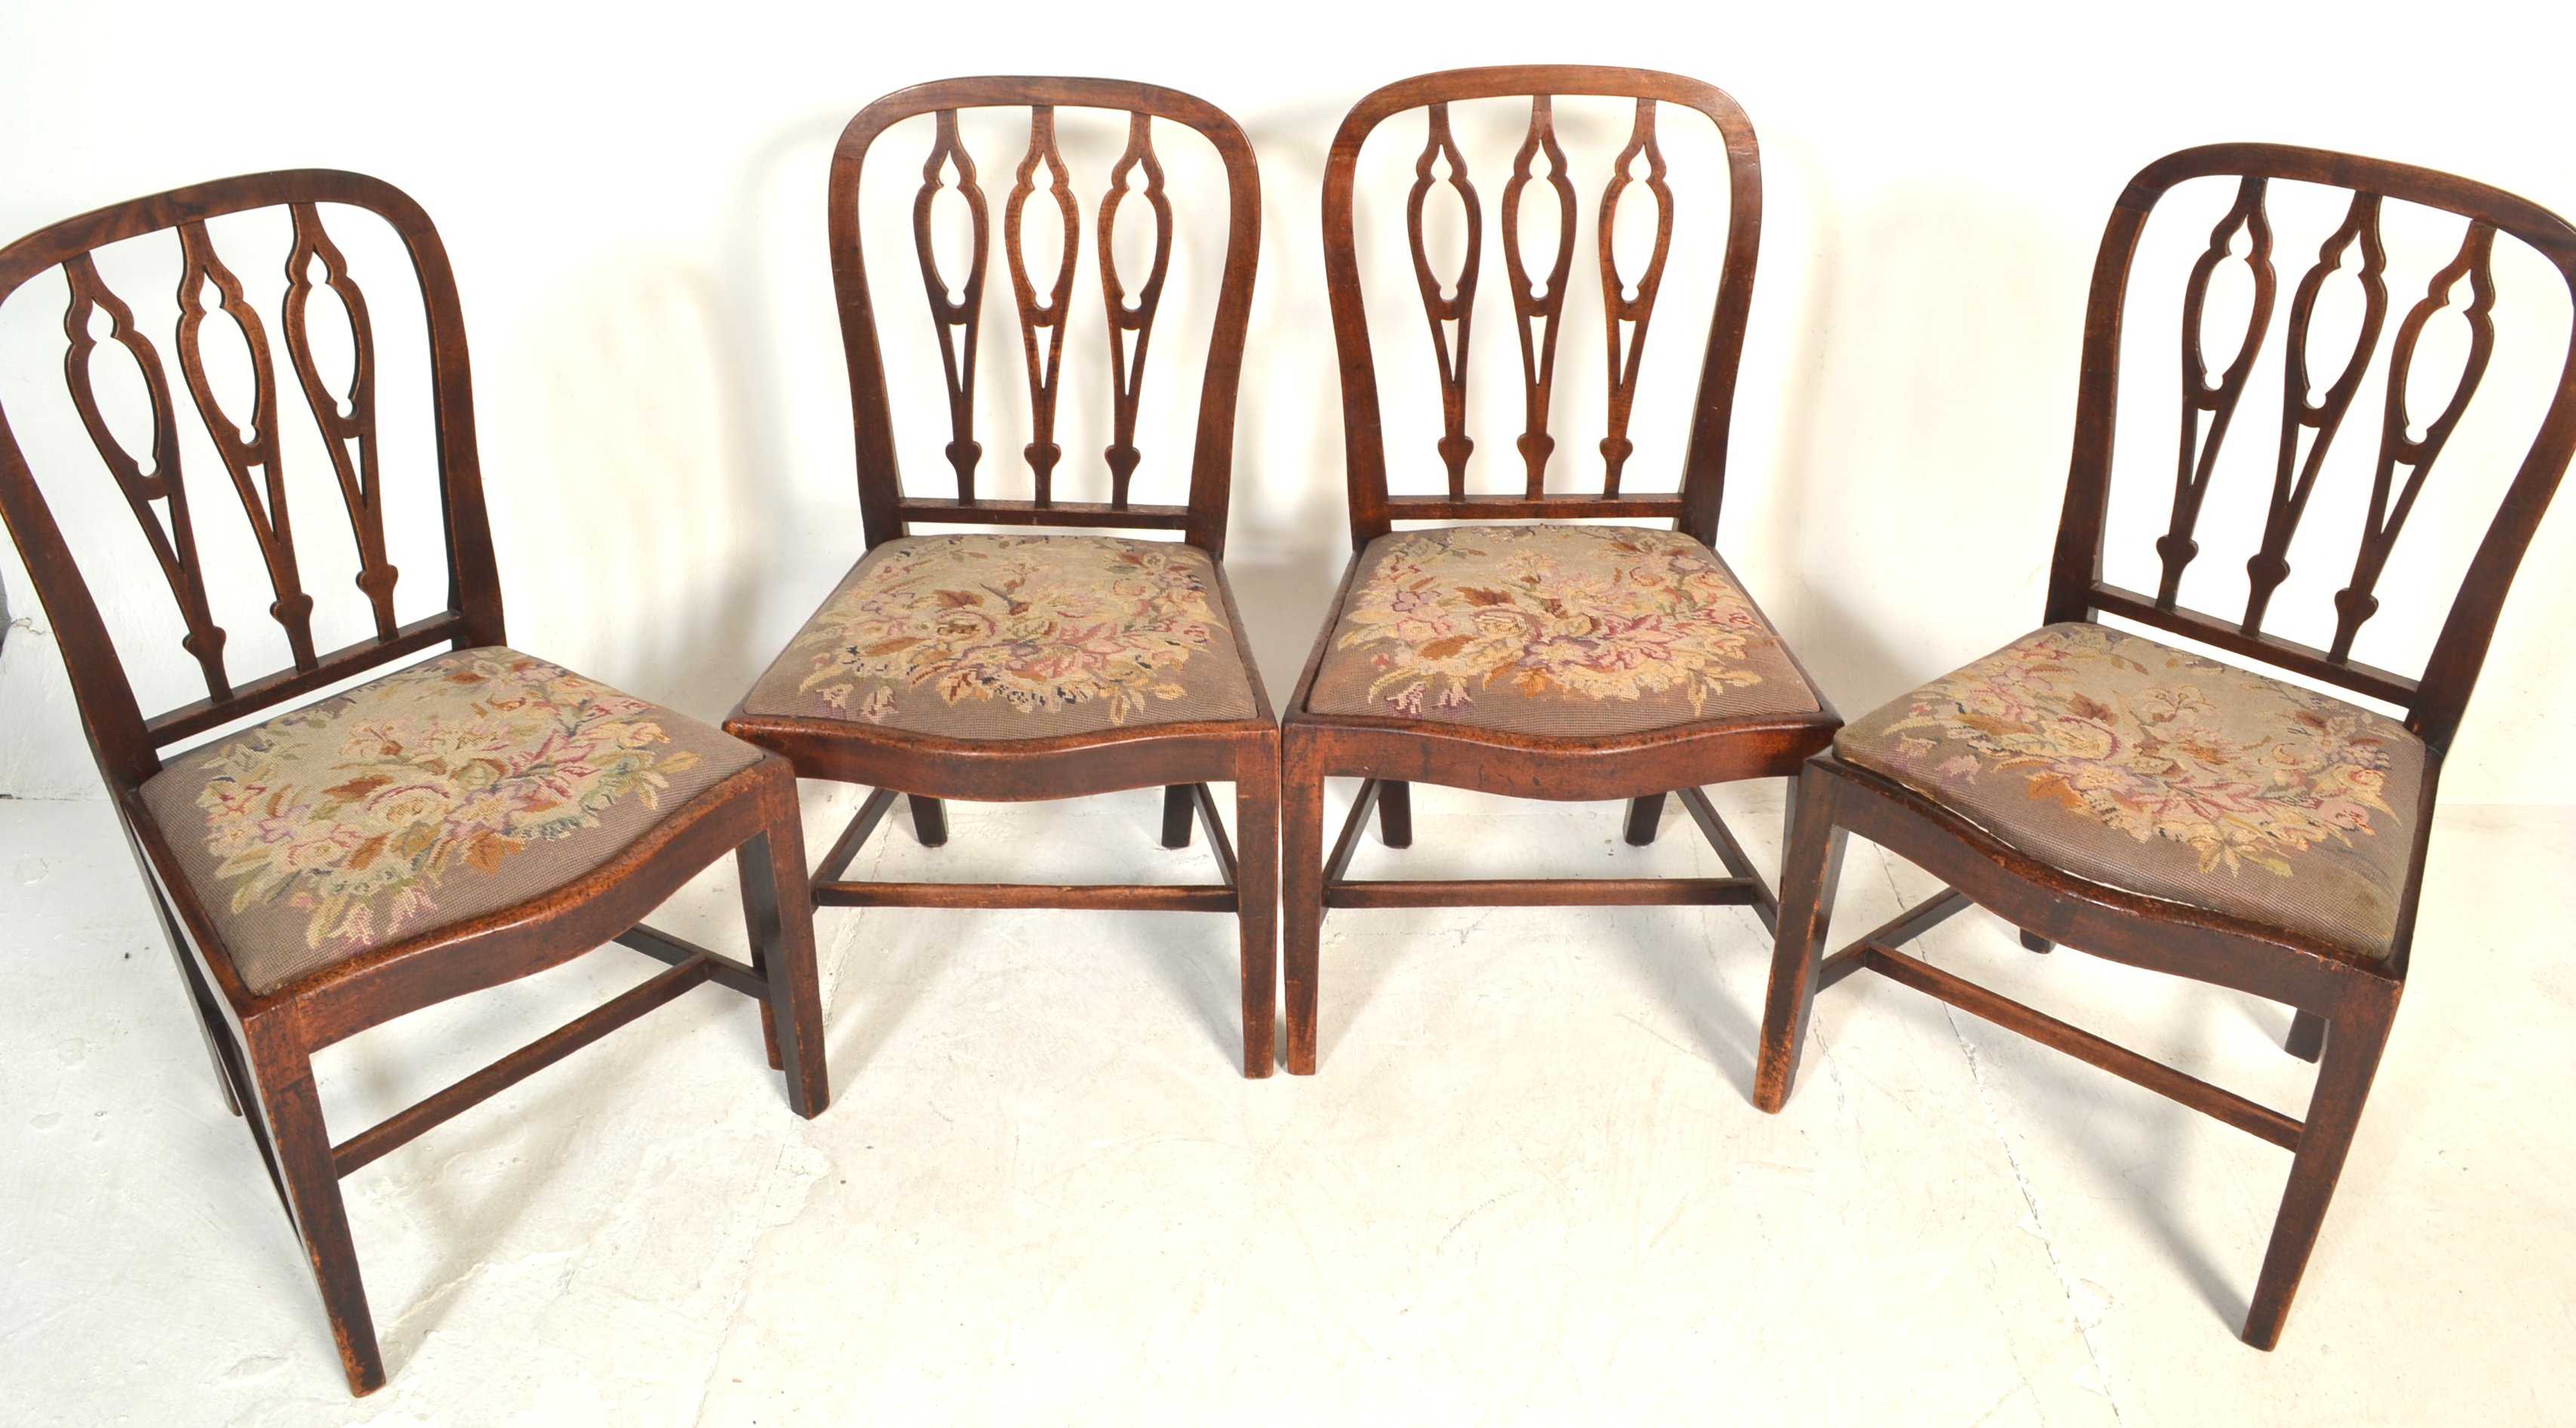 SET OF 6 19TH CENTURY GEORGE III MAHOGANY DINING CHAIRS - Image 8 of 32